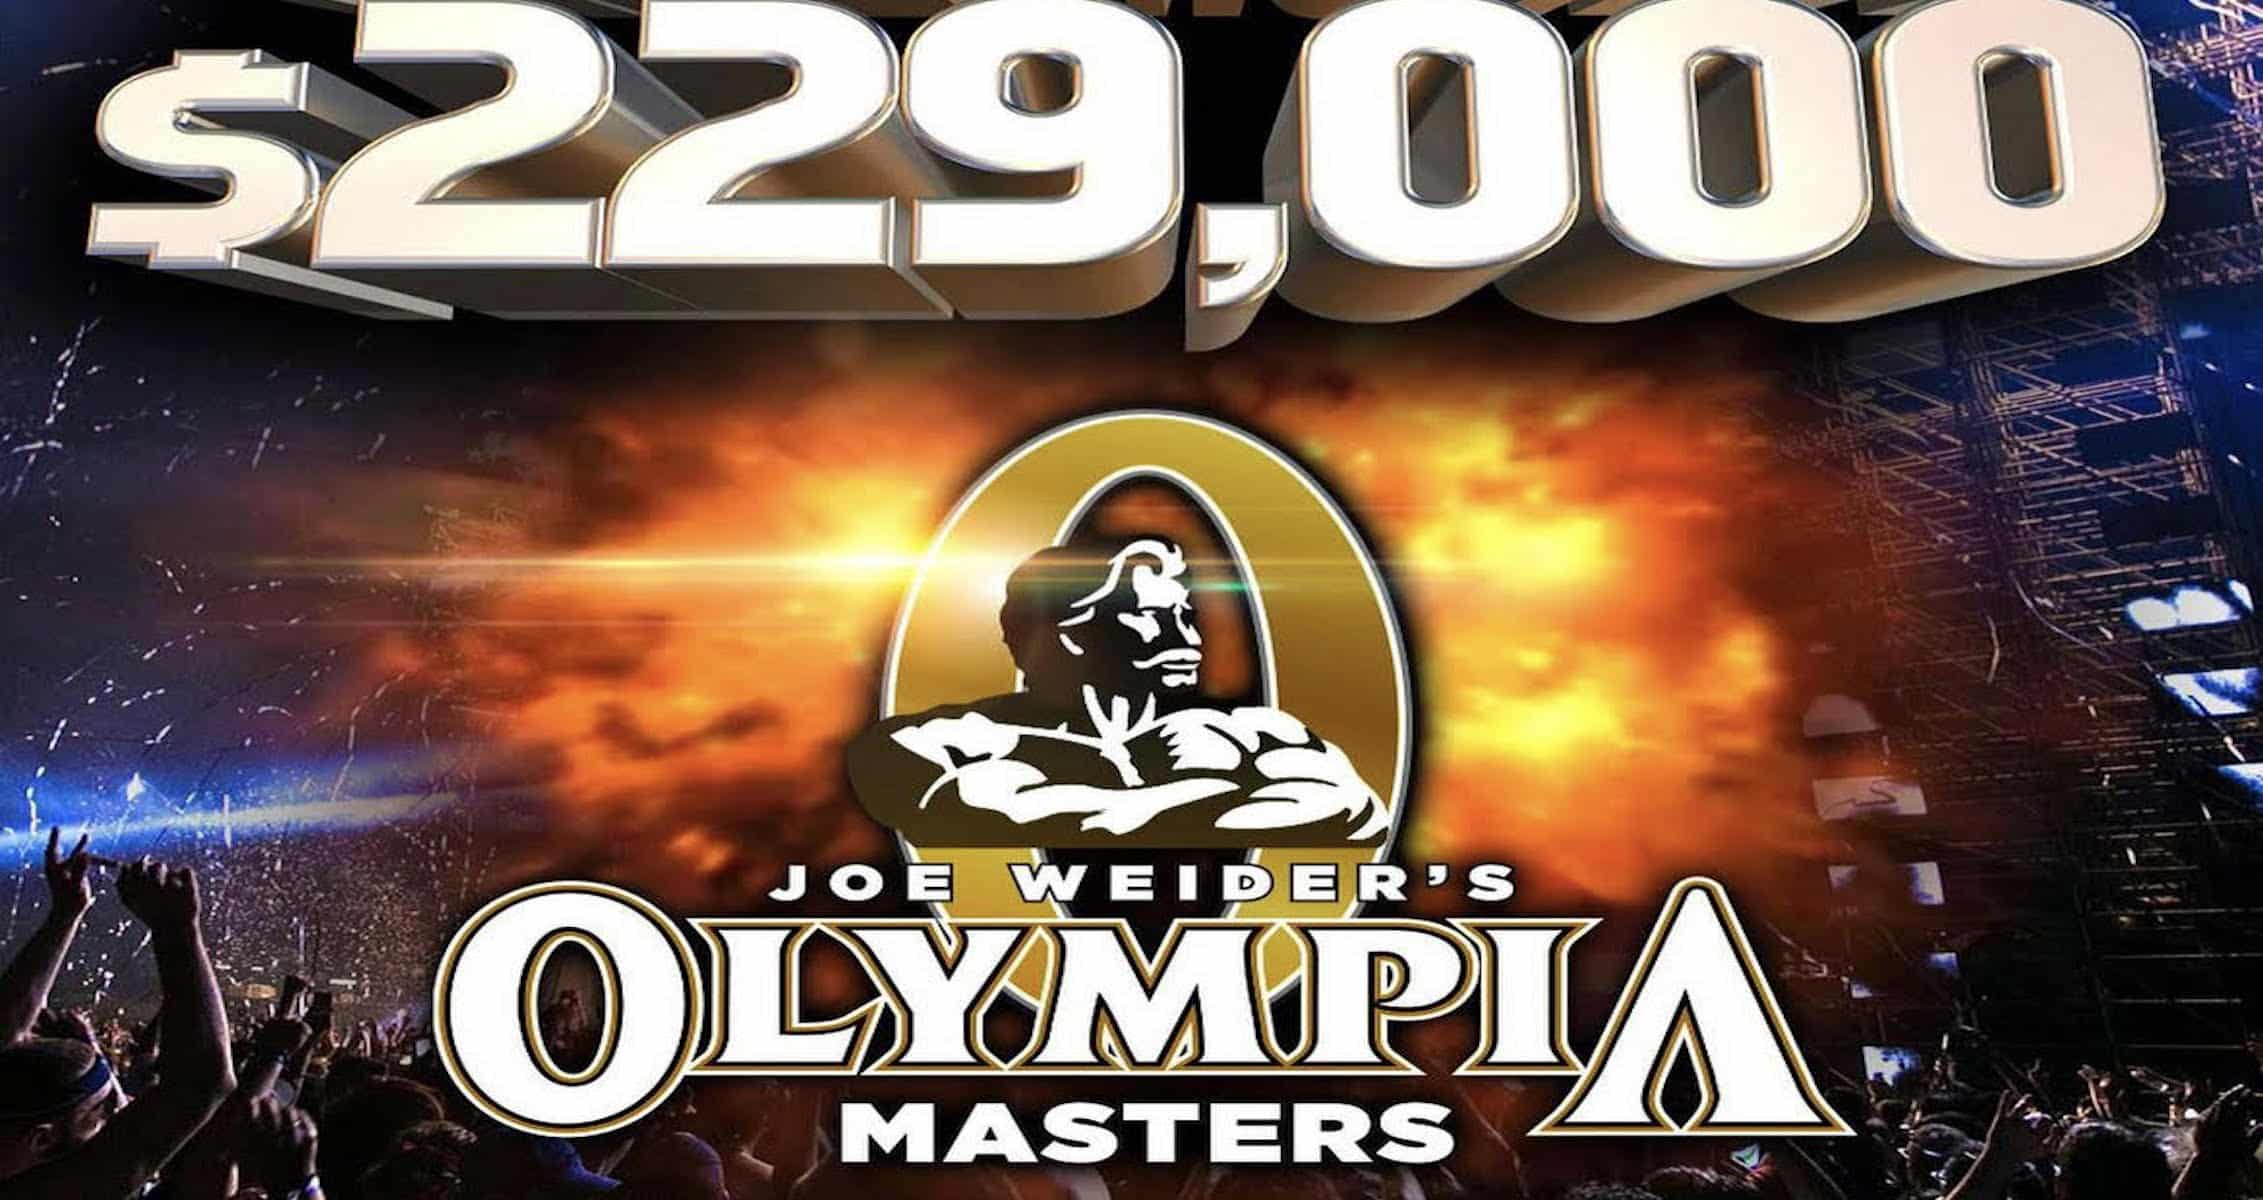 A Look At The 2023 Japan Masters Prize Money On Offer